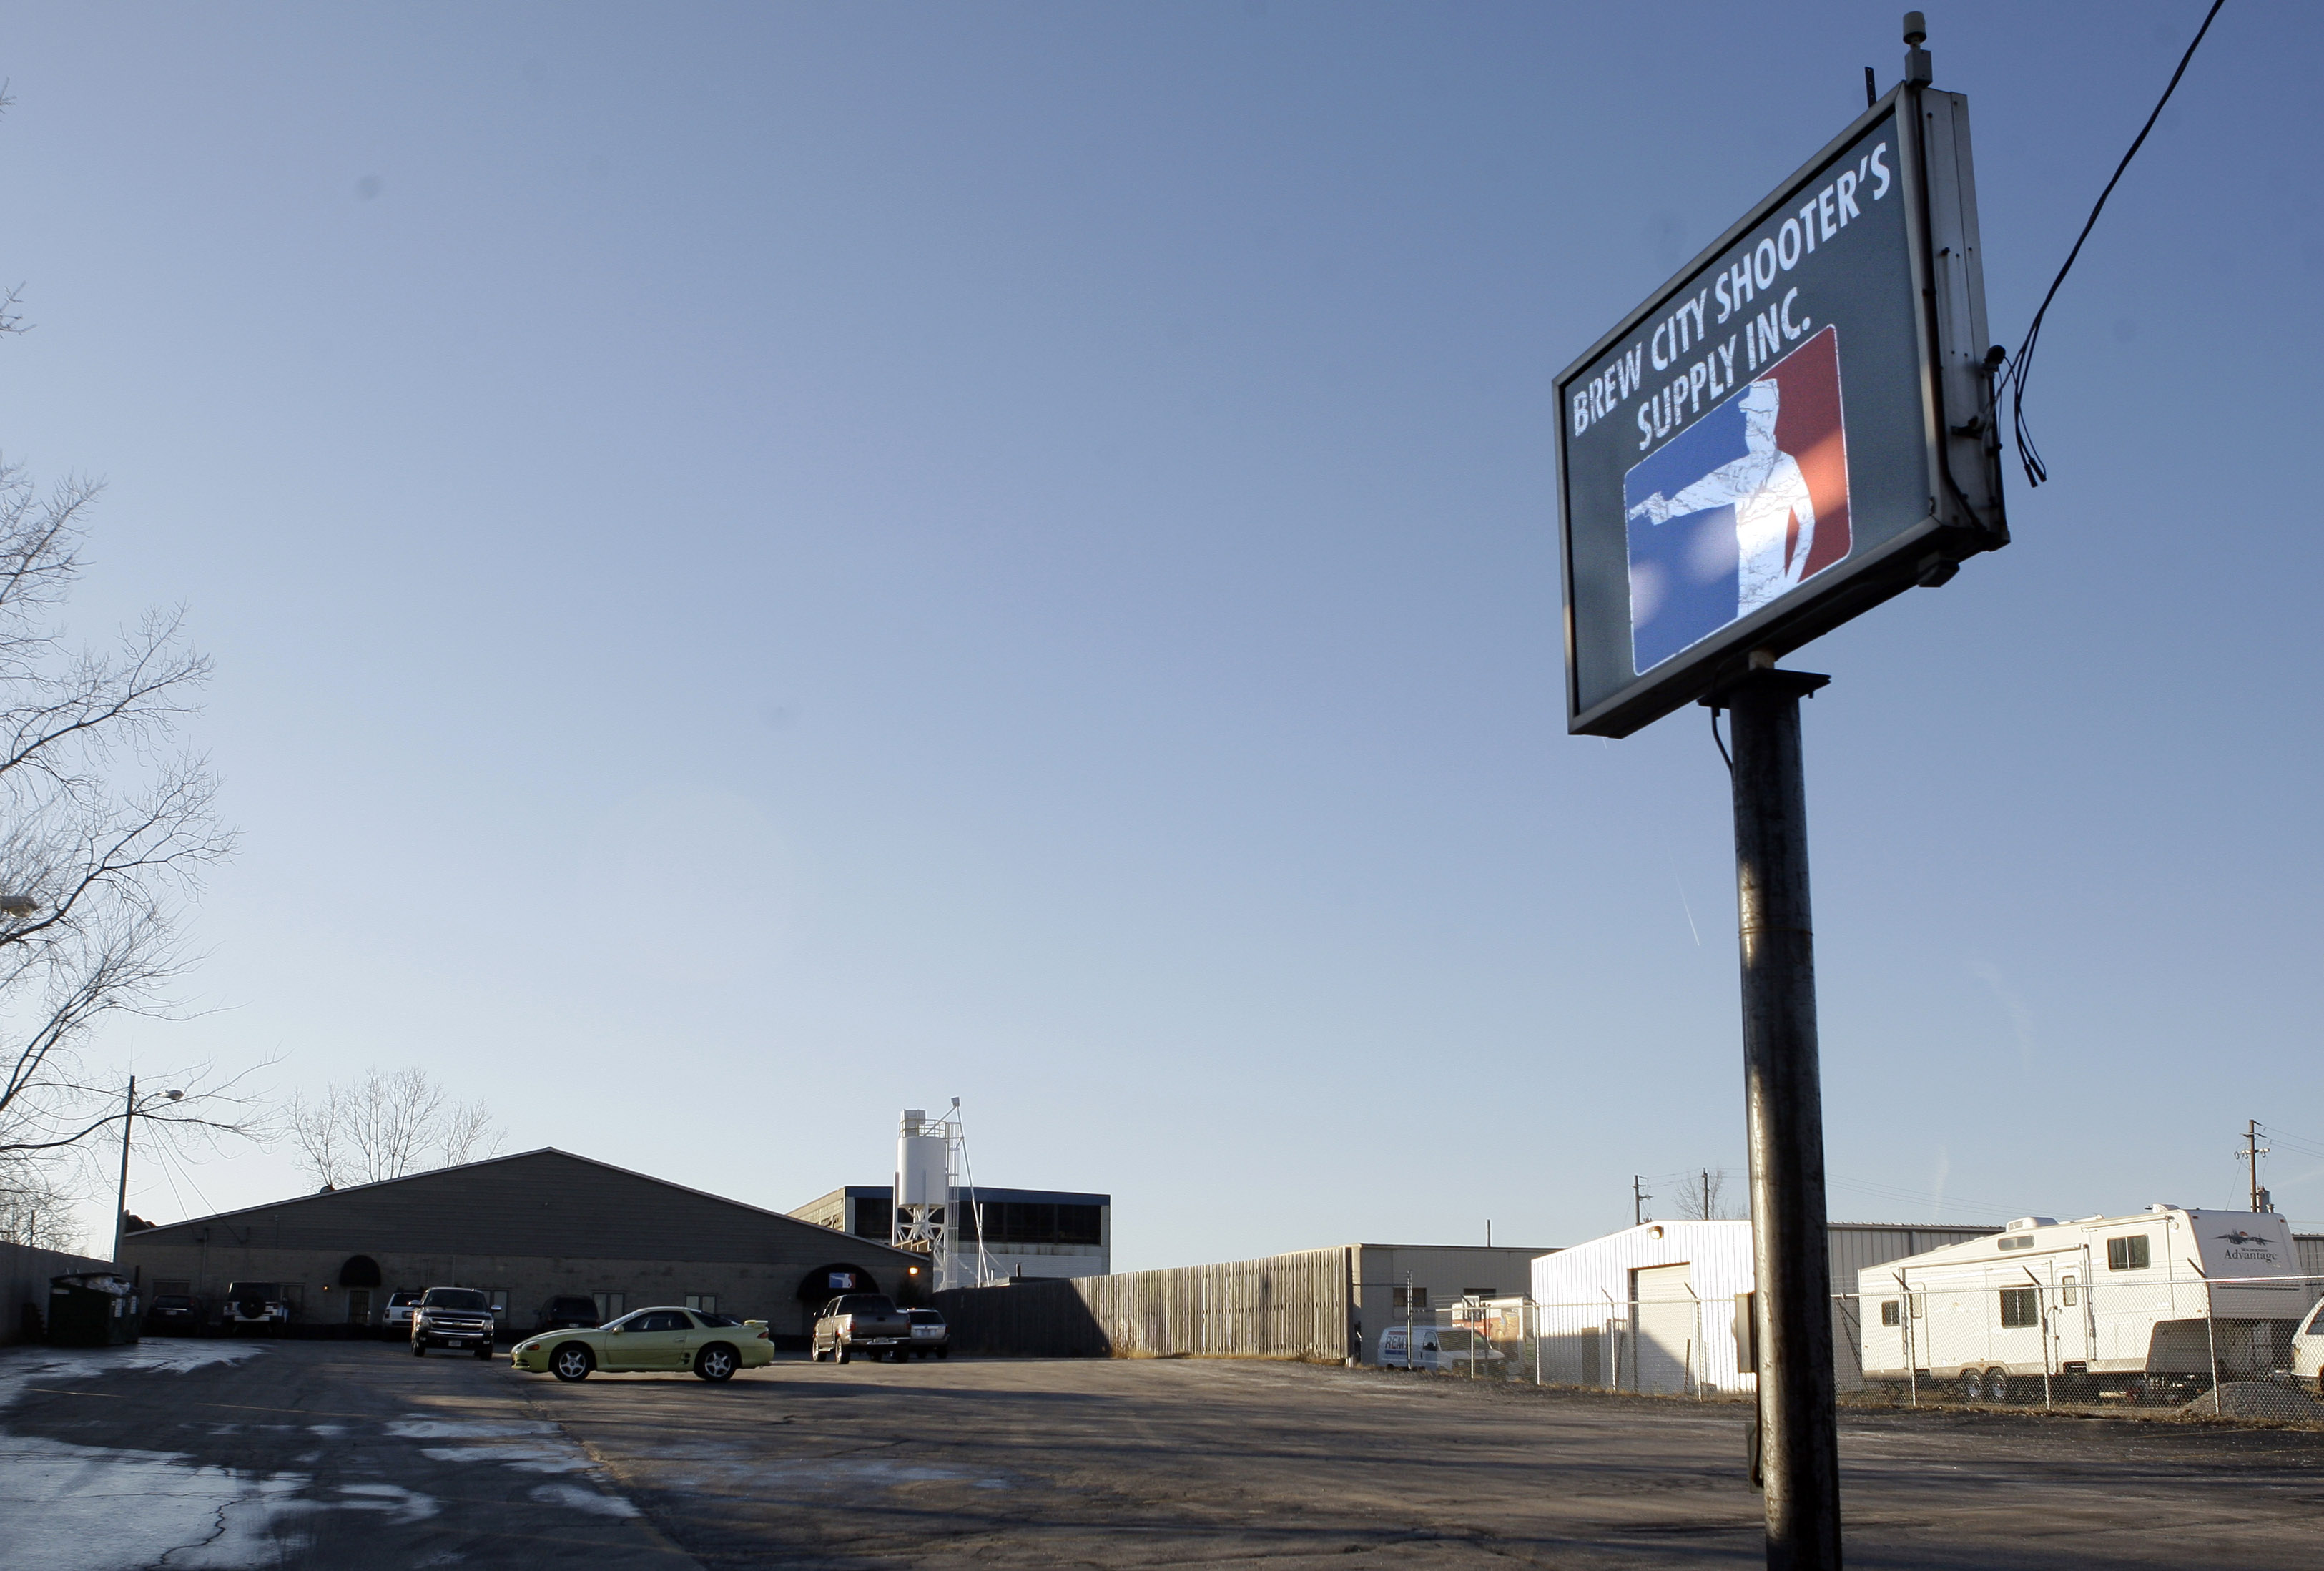 Brew City Shooter's Supply Inc., formerly known as Badger Guns, in Milwaukee, on Jan. 10, 2011. (Mike De Sisti—AP)